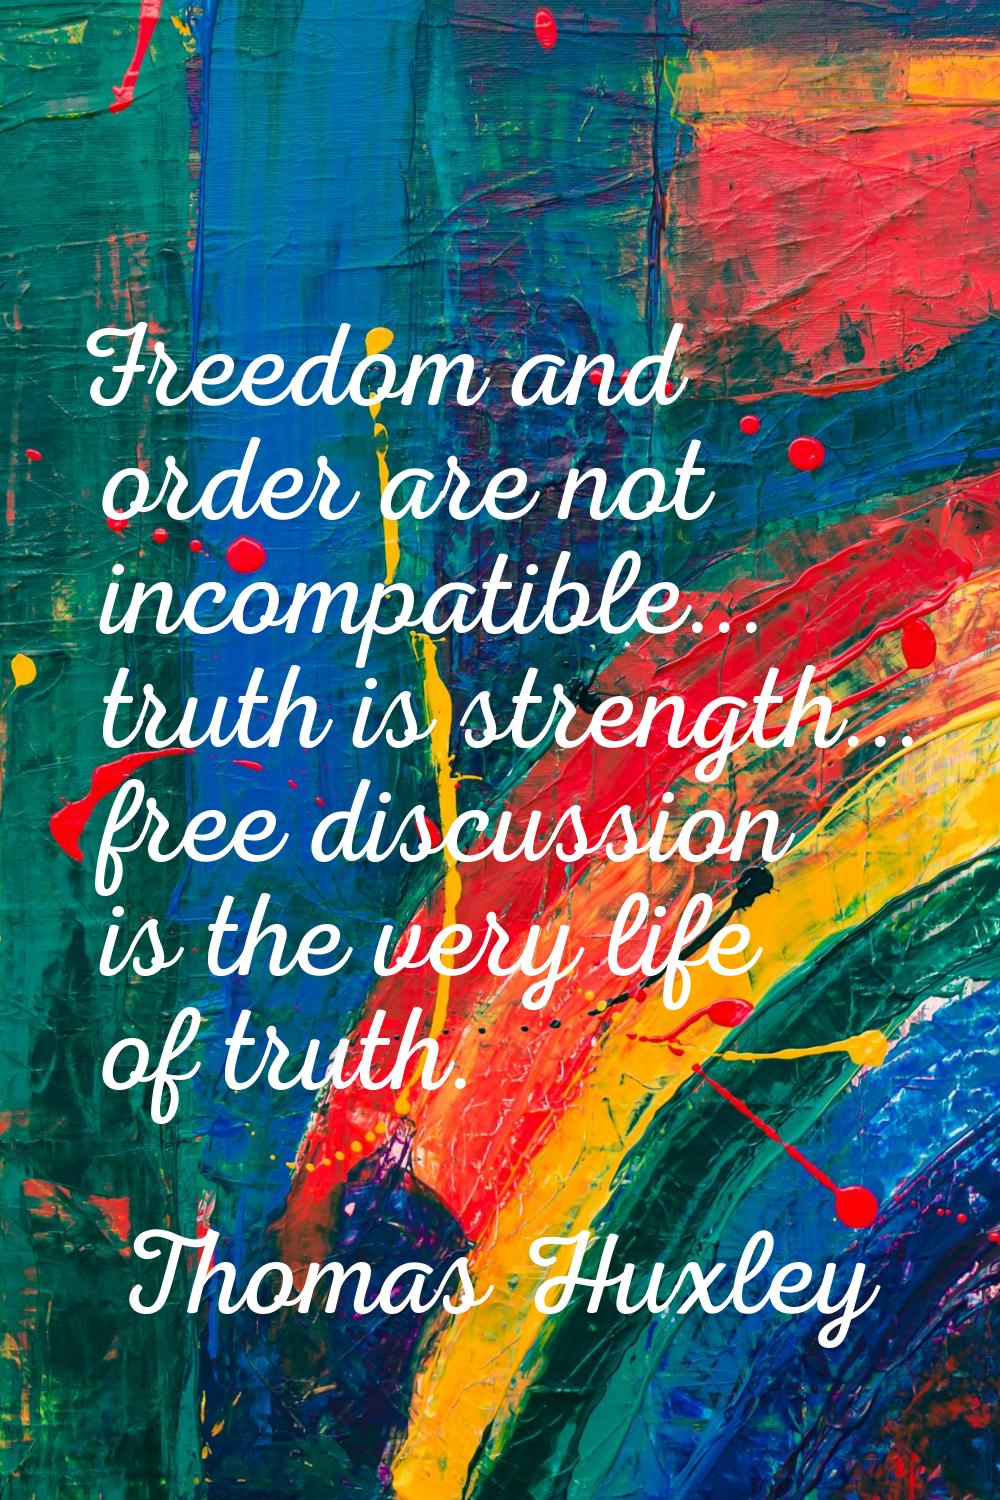 Freedom and order are not incompatible... truth is strength... free discussion is the very life of 